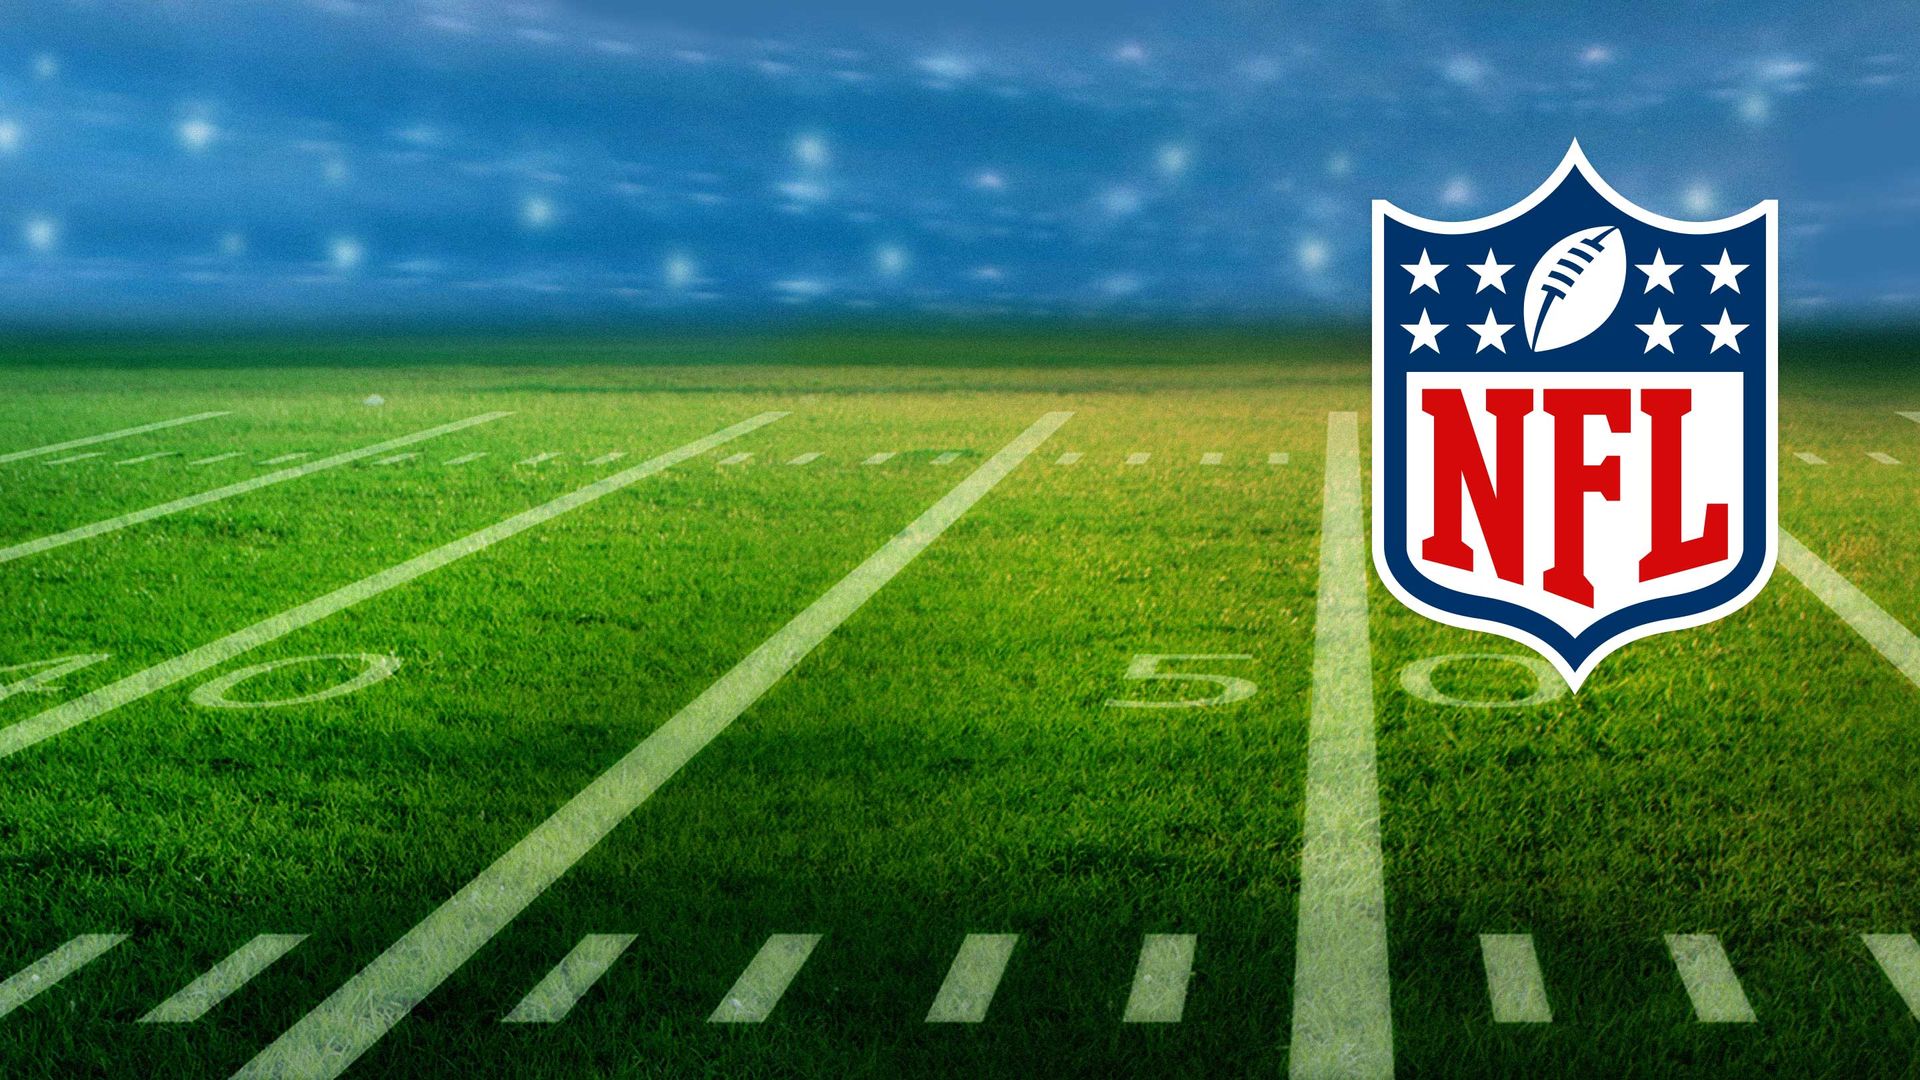 download cbs streaming nfl